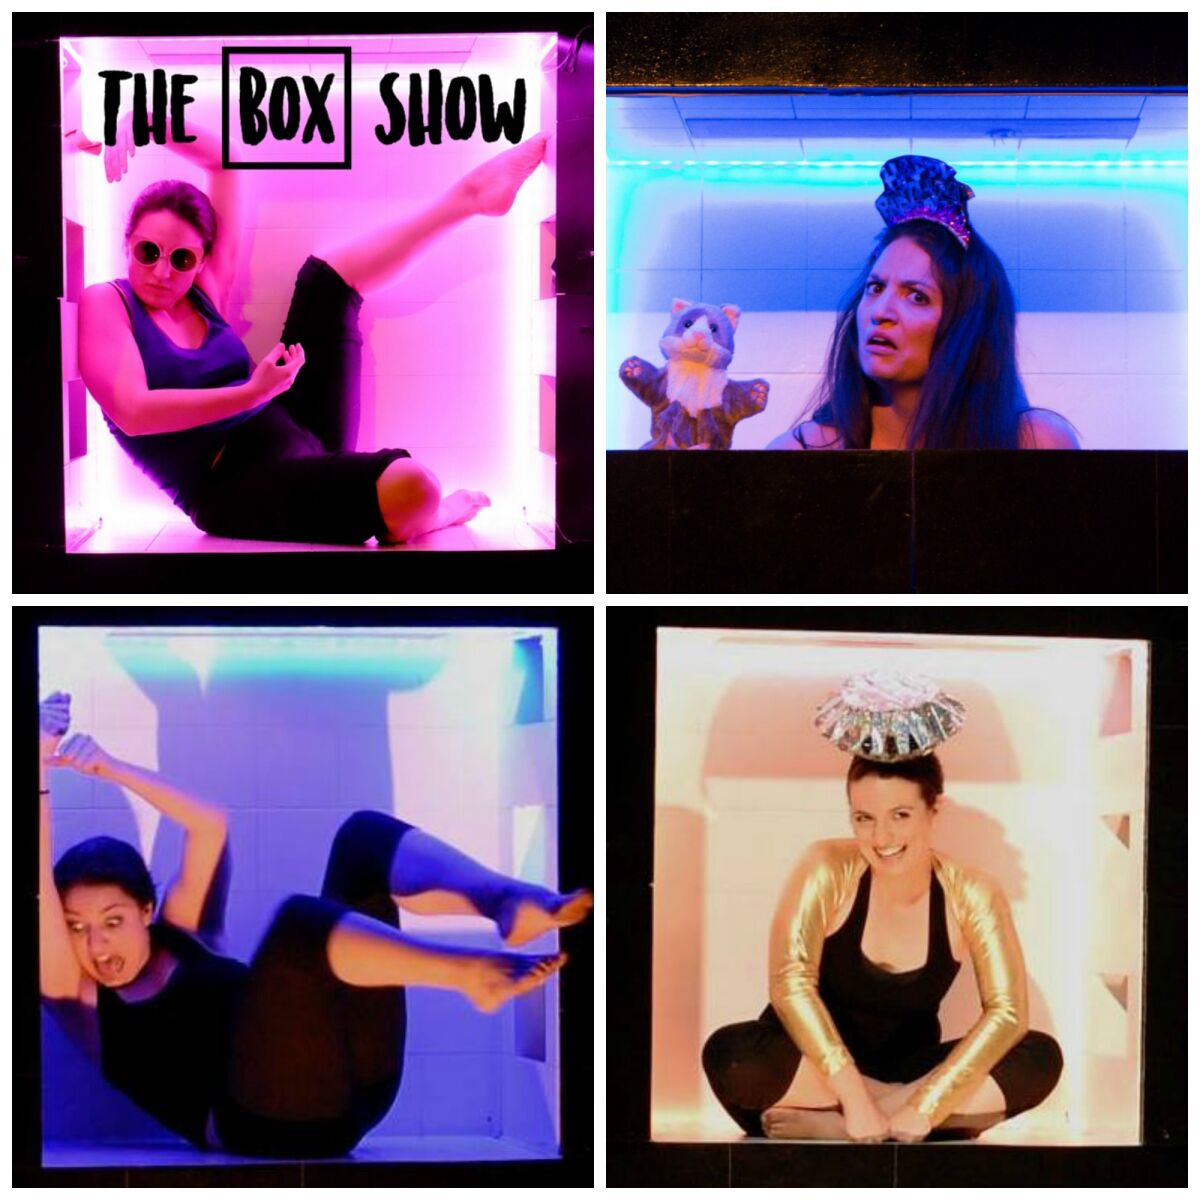 The Box Show is a one-woman production featuring La Jolla native Dominique Salerno playing 30 roles inside a box.